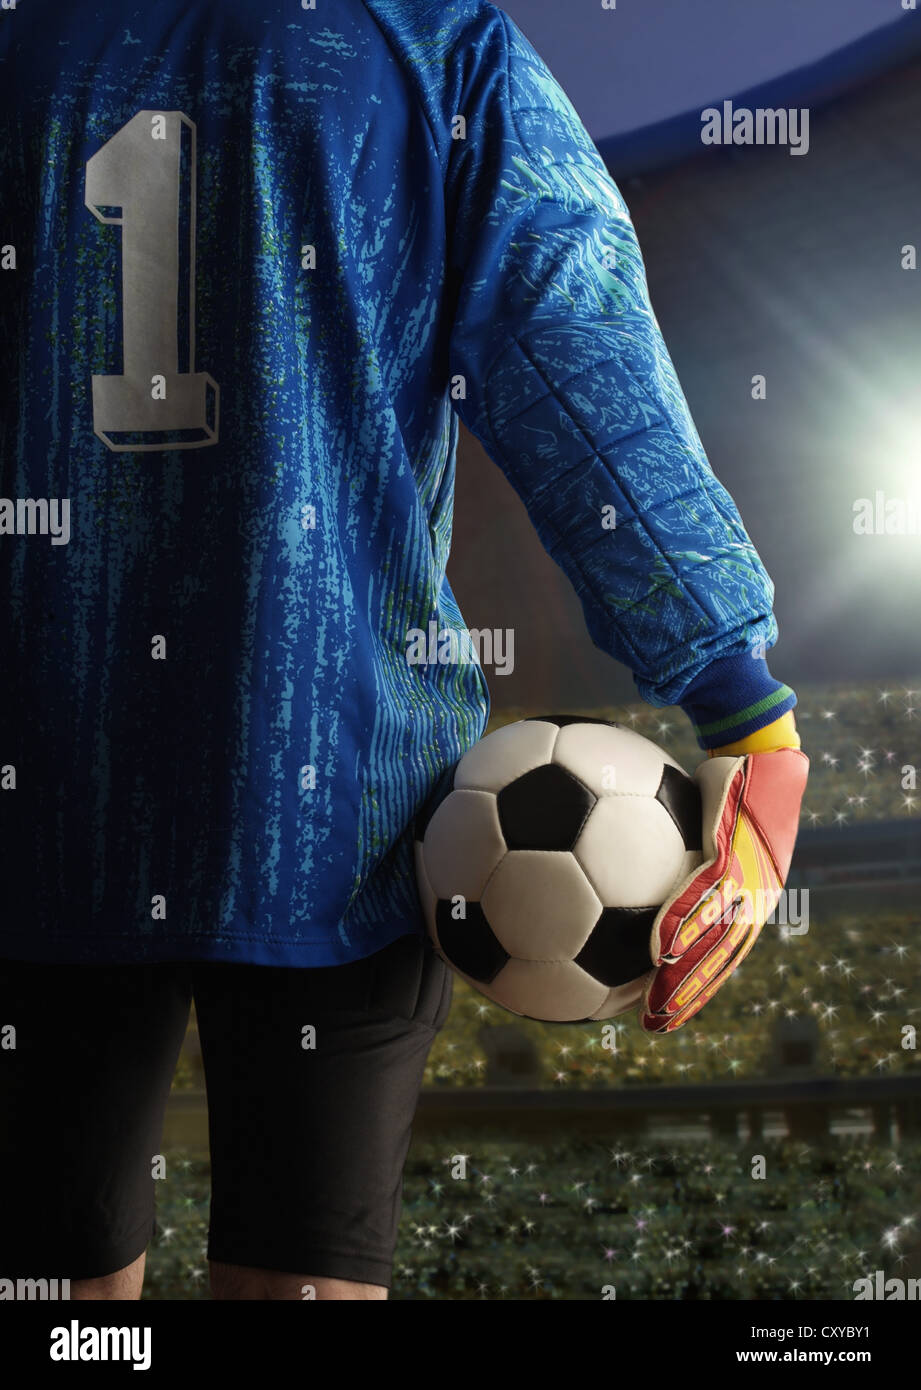 Goalkeeper holding a football, seen from behind, at a football stadium Stock Photo